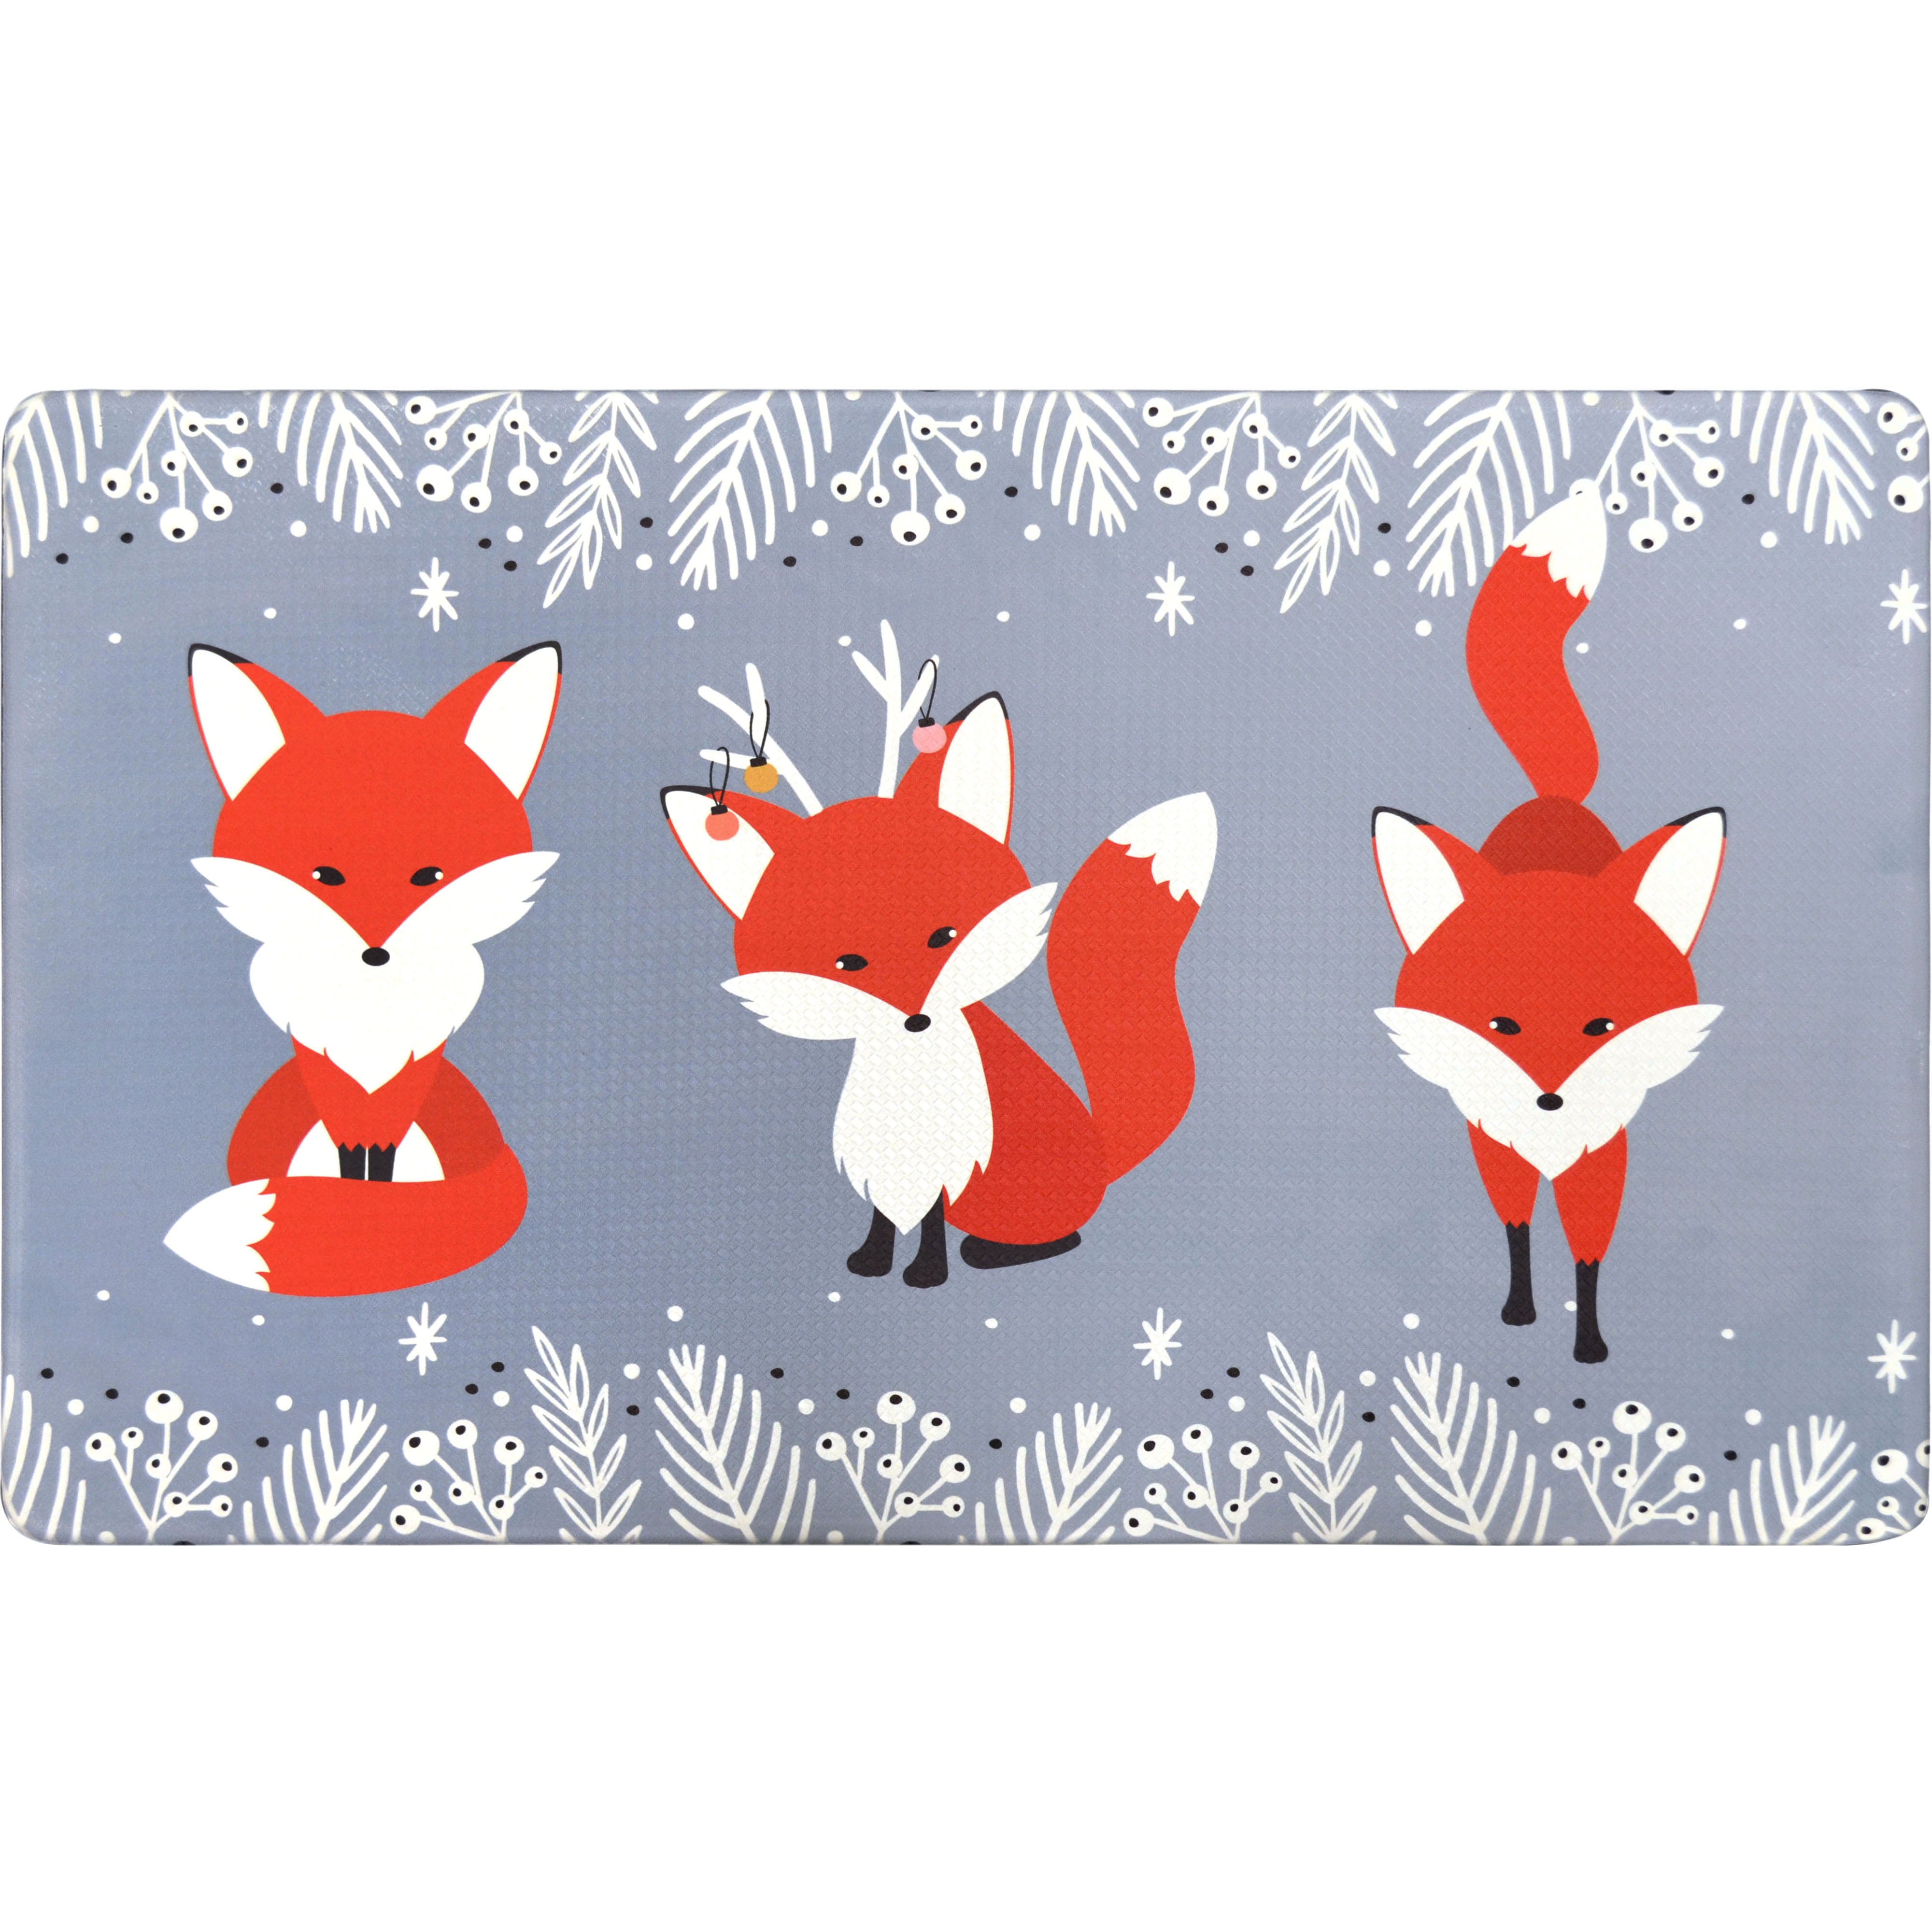 20"x32" Holiday Themed Cushioned Anti-Fatigue Kitchen Mat (Fox) - Kitchen Mats - J&V Textiles Premiere Home Goods